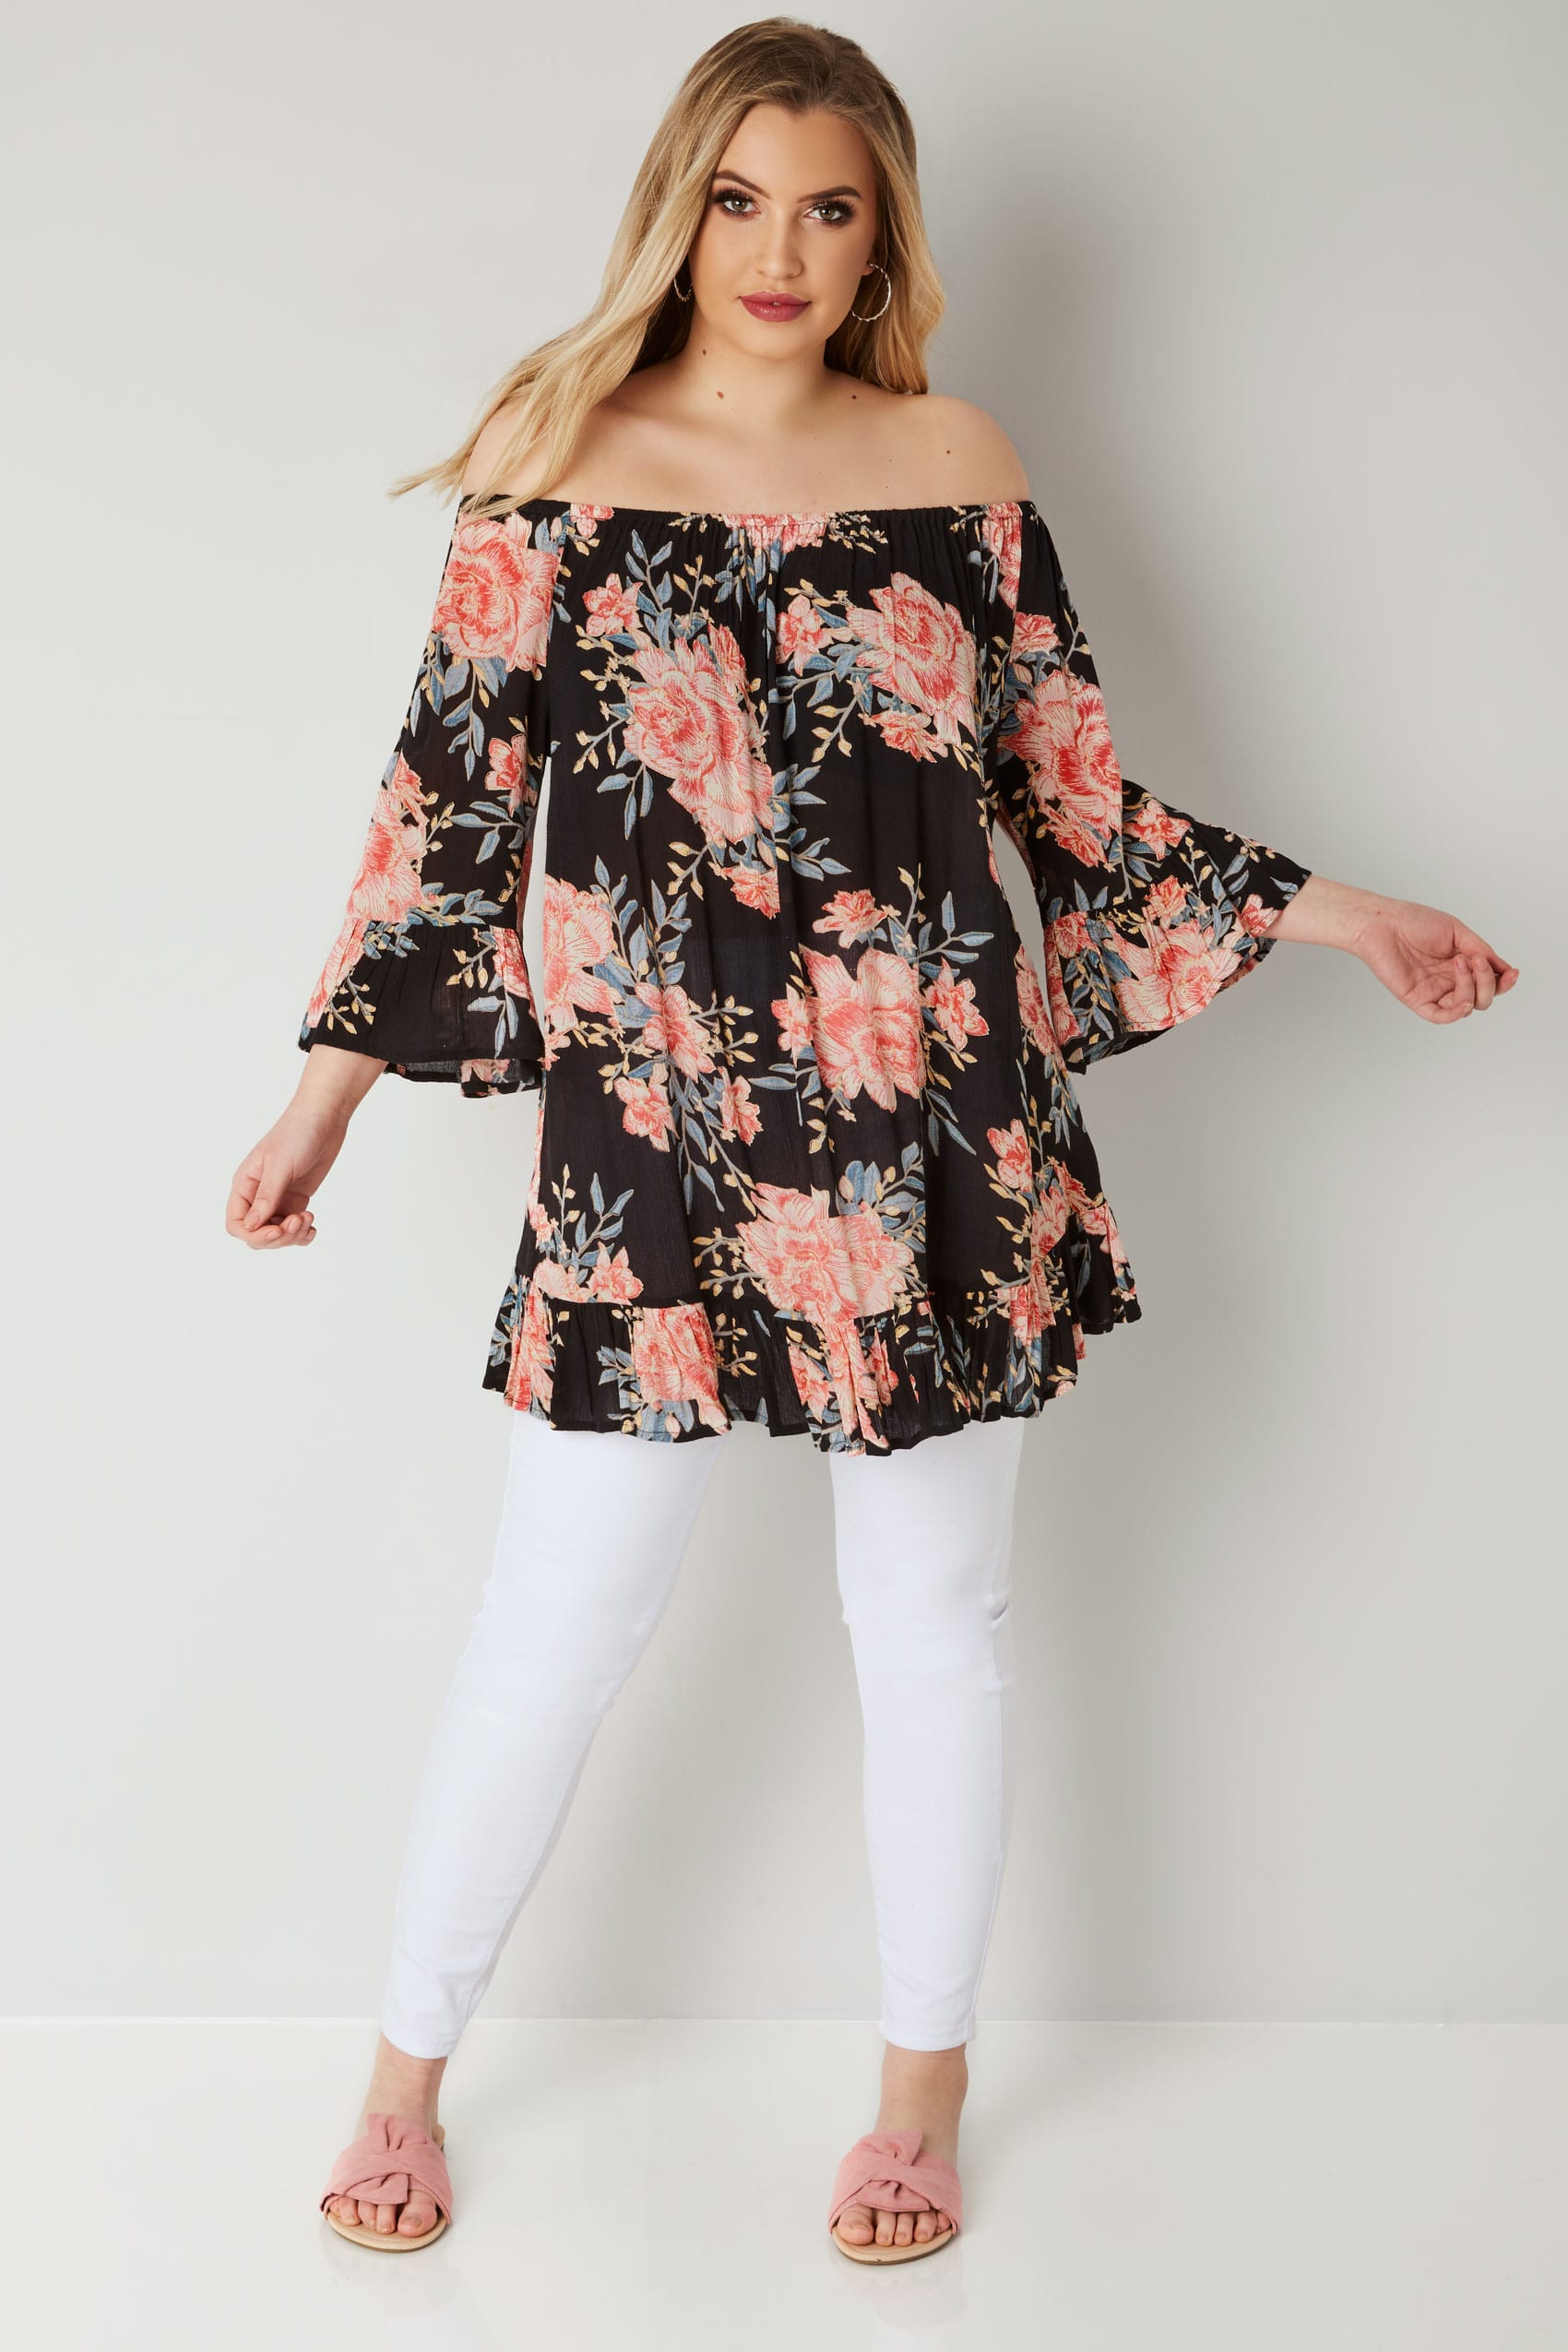 Ivory And Purple Floral Gypsy Top Plus Size 16,18,20,22,24 